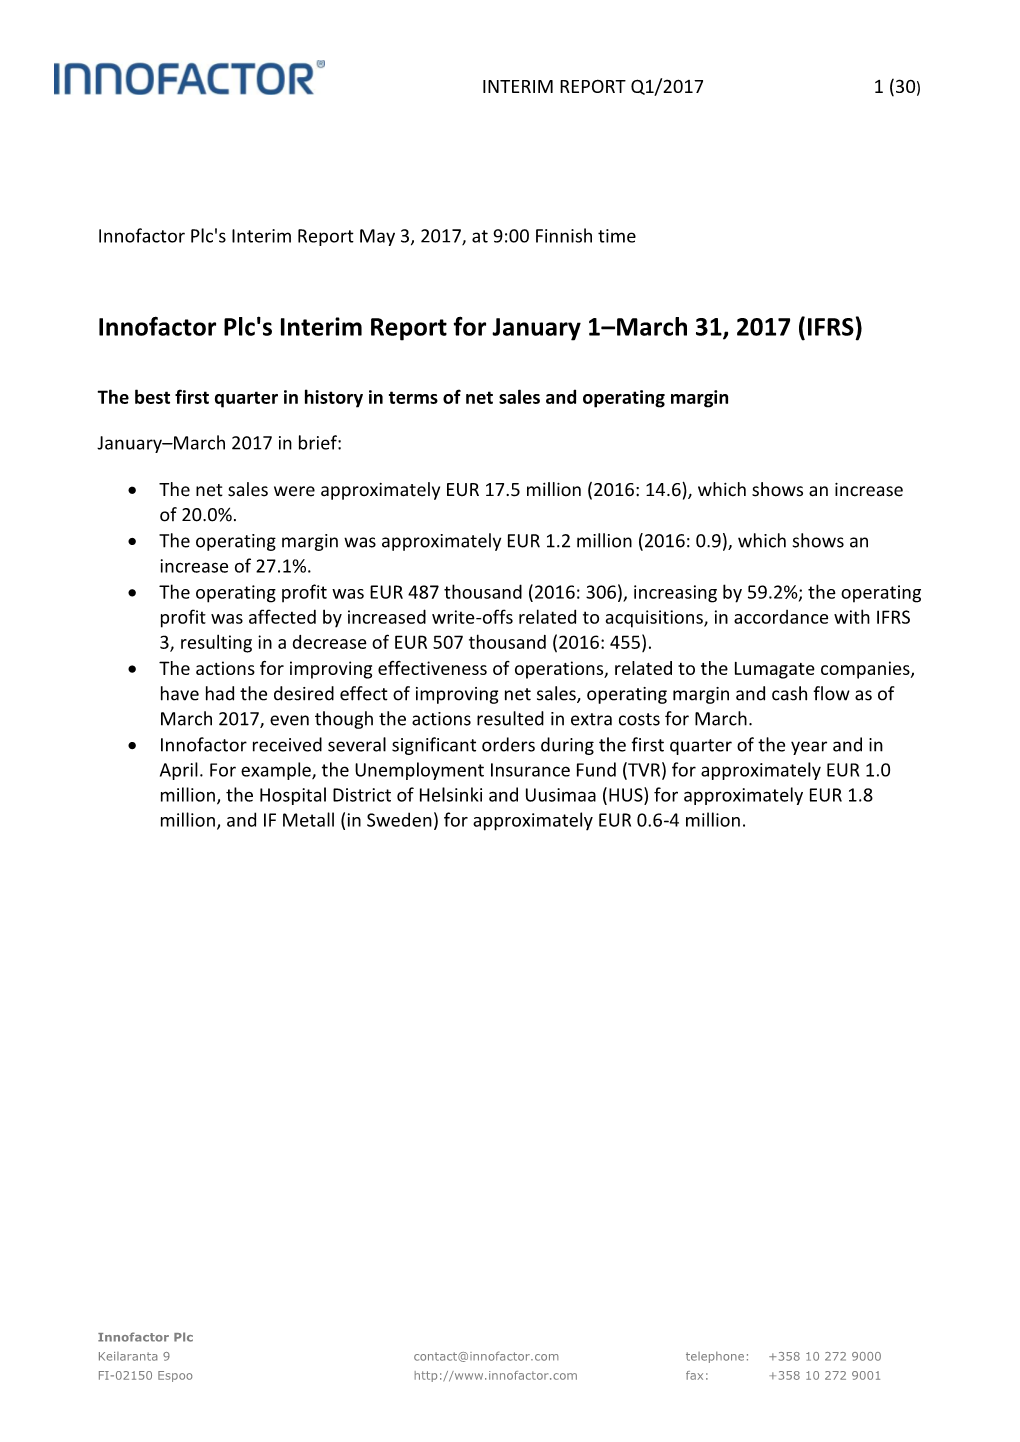 Innofactor Plc's Interim Report for January 1–March 31, 2017 (IFRS)